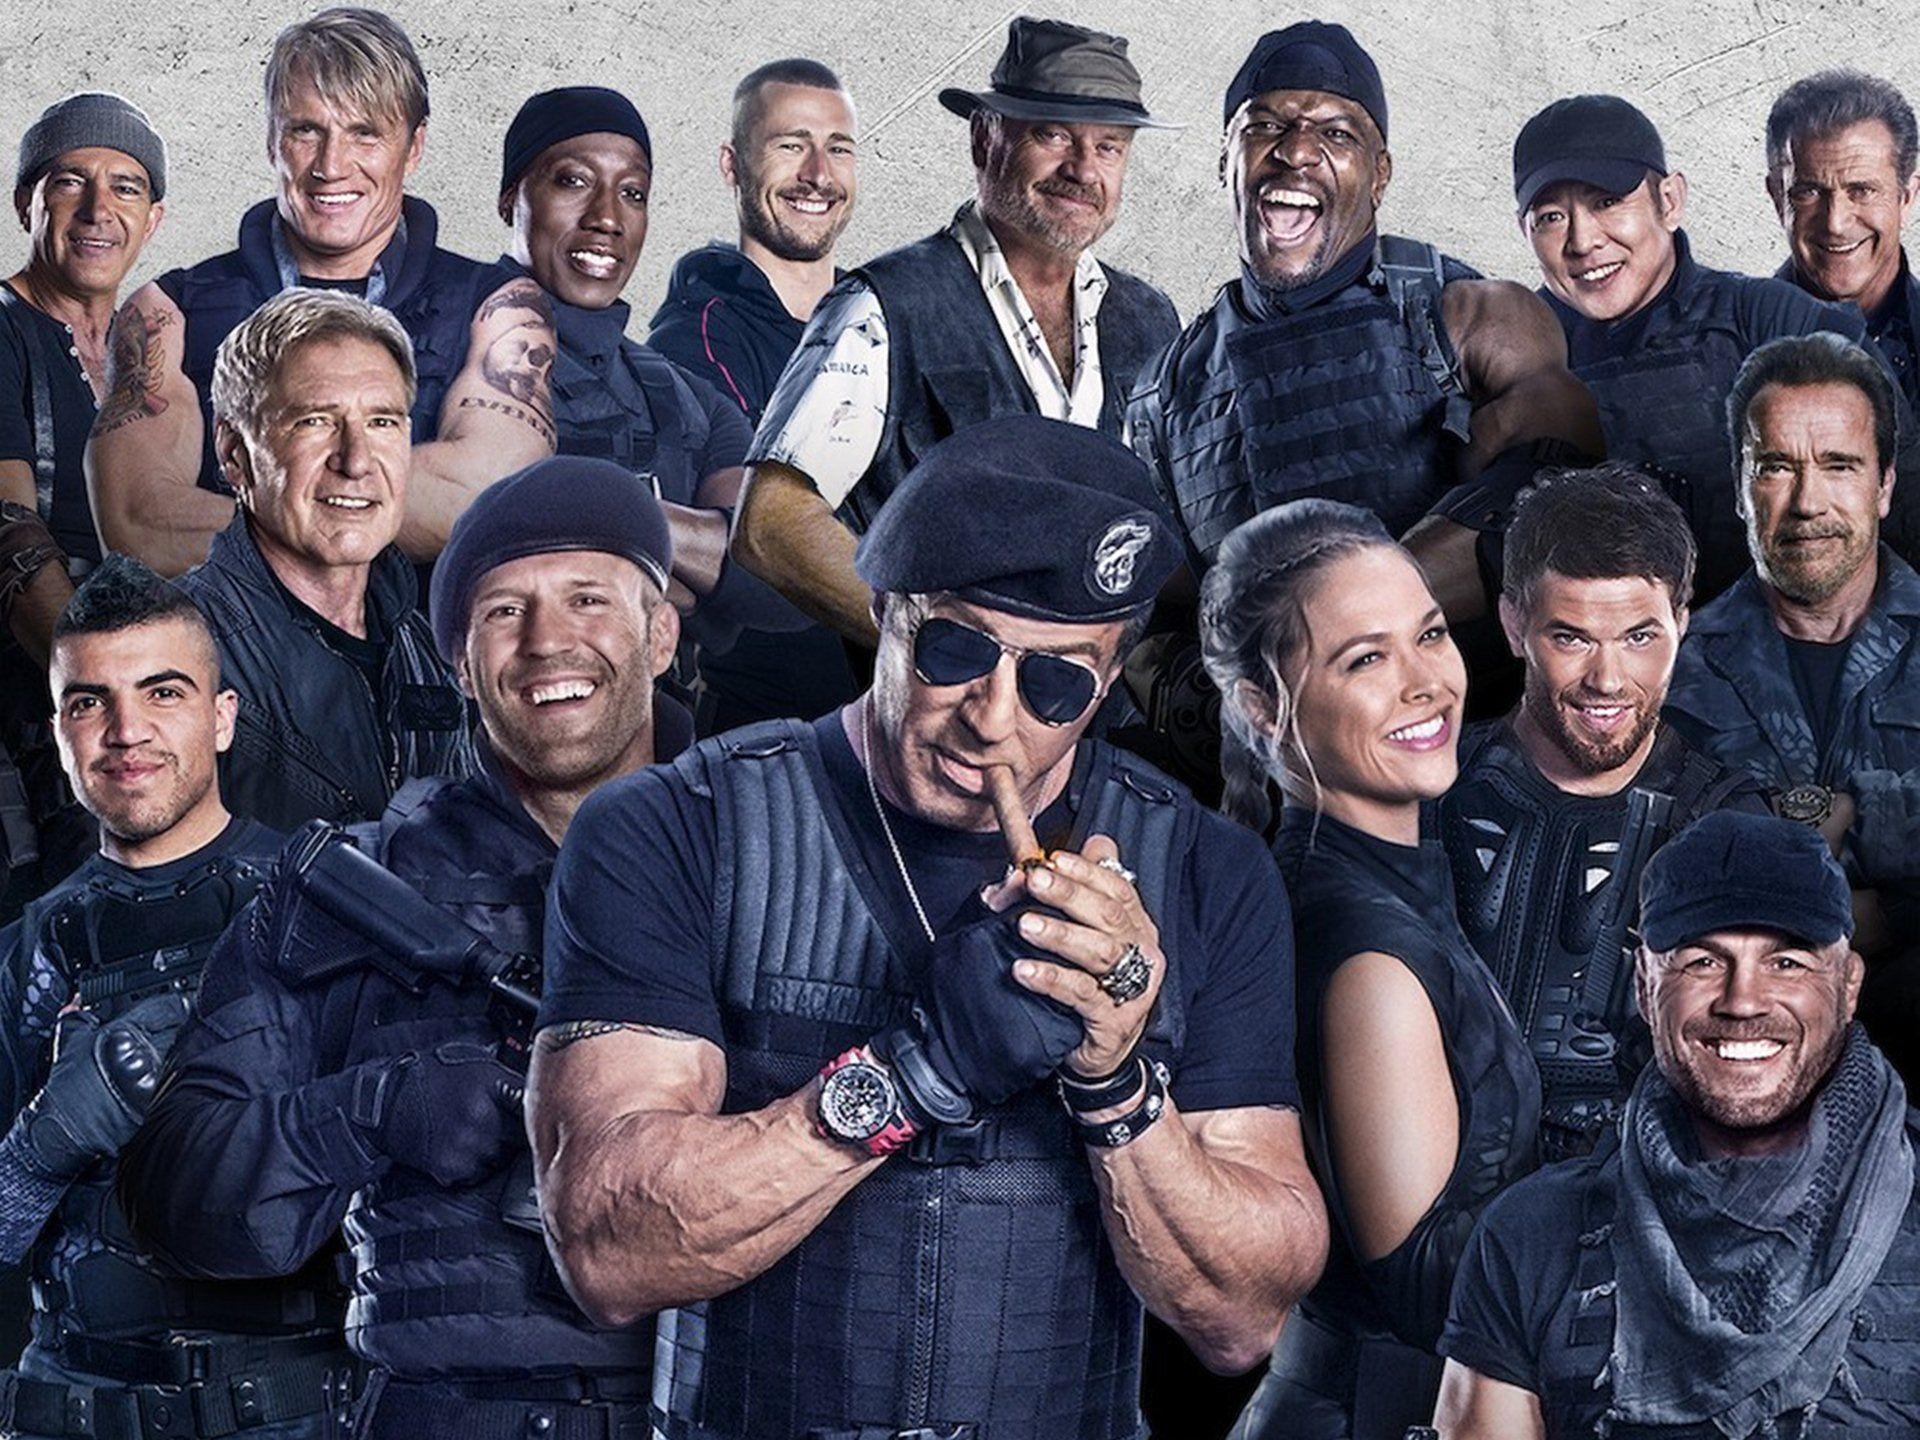 In Gallery: The Expendables 3 Wallpaper, 42 The Expendables 3 HD